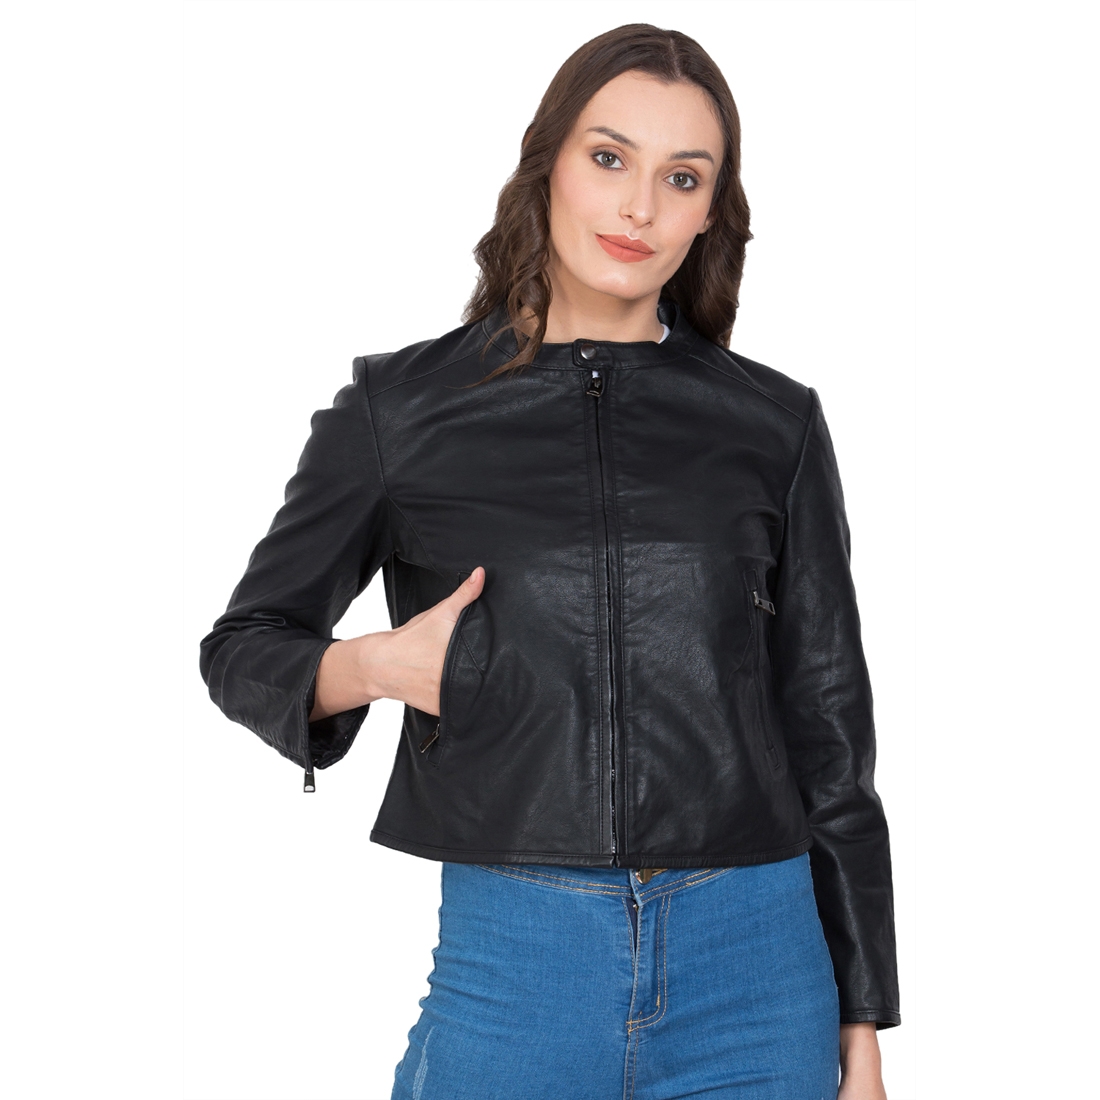 Justanned | JUSTANNED CHARCOAL WOMEN LEATHER JACKET